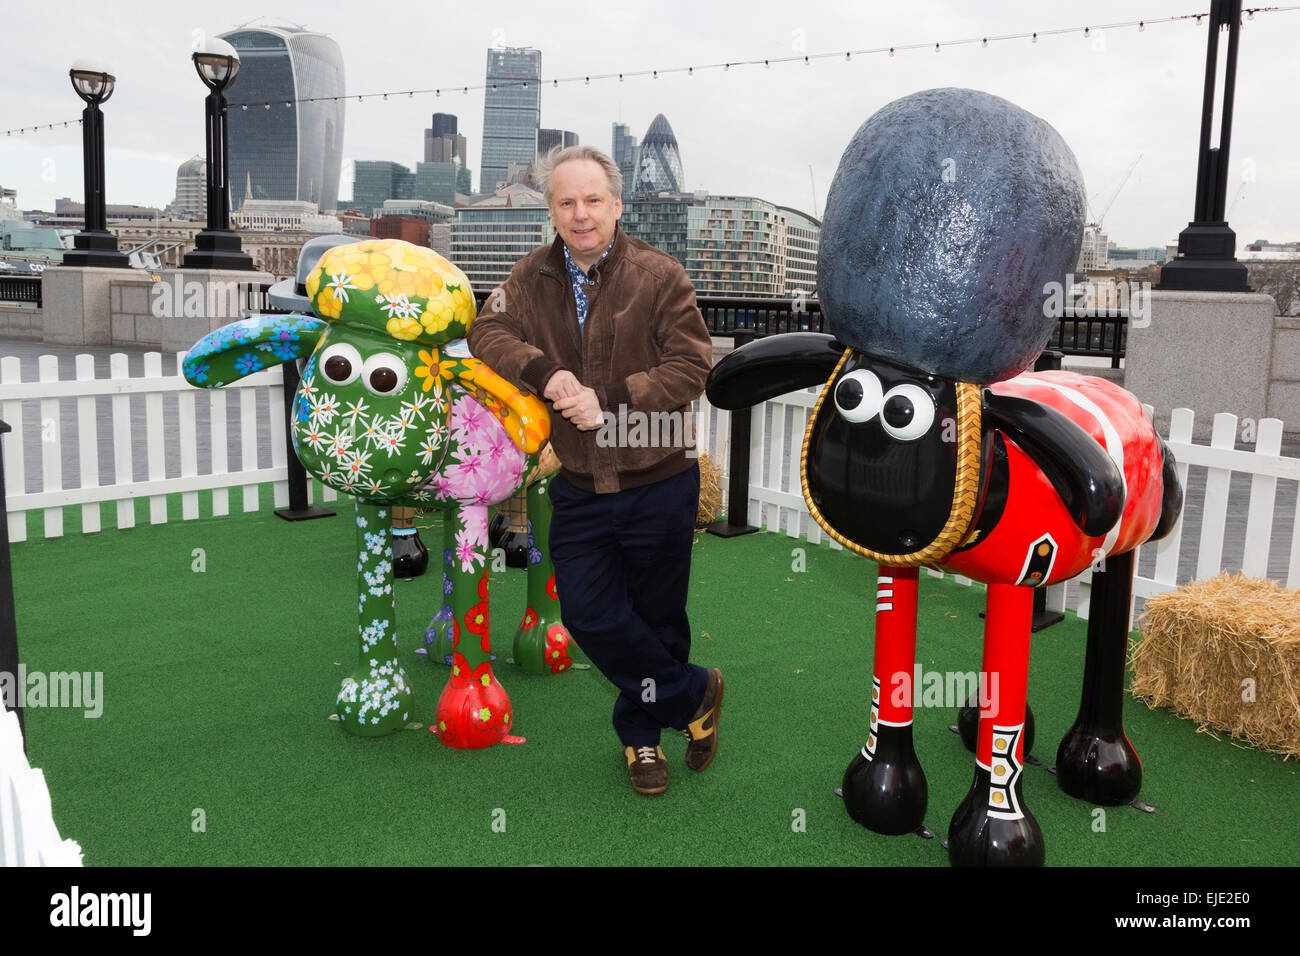 London, UK. 24 March 2015. Animator Nick Park poses with sheep 'Petal' designed by Emily Ketteringham and the 'Yeoman of the Baaard' sheep designed by Vivi Cuevas at the Shaun in the City London launch. Aardman Animations' 'Shaun the Sheep' are set to be dotted around London from Saturday 28th March to form a special arts trail that will benefit thousands of children in hospitals around the UK. The sculptures have been designed by high profile artists, designers and celebrities including David Gandy, Zayn Malik, Zandra Rhodes and Cath Kidston and will be auctioned after the exhibition finishes Stock Photo